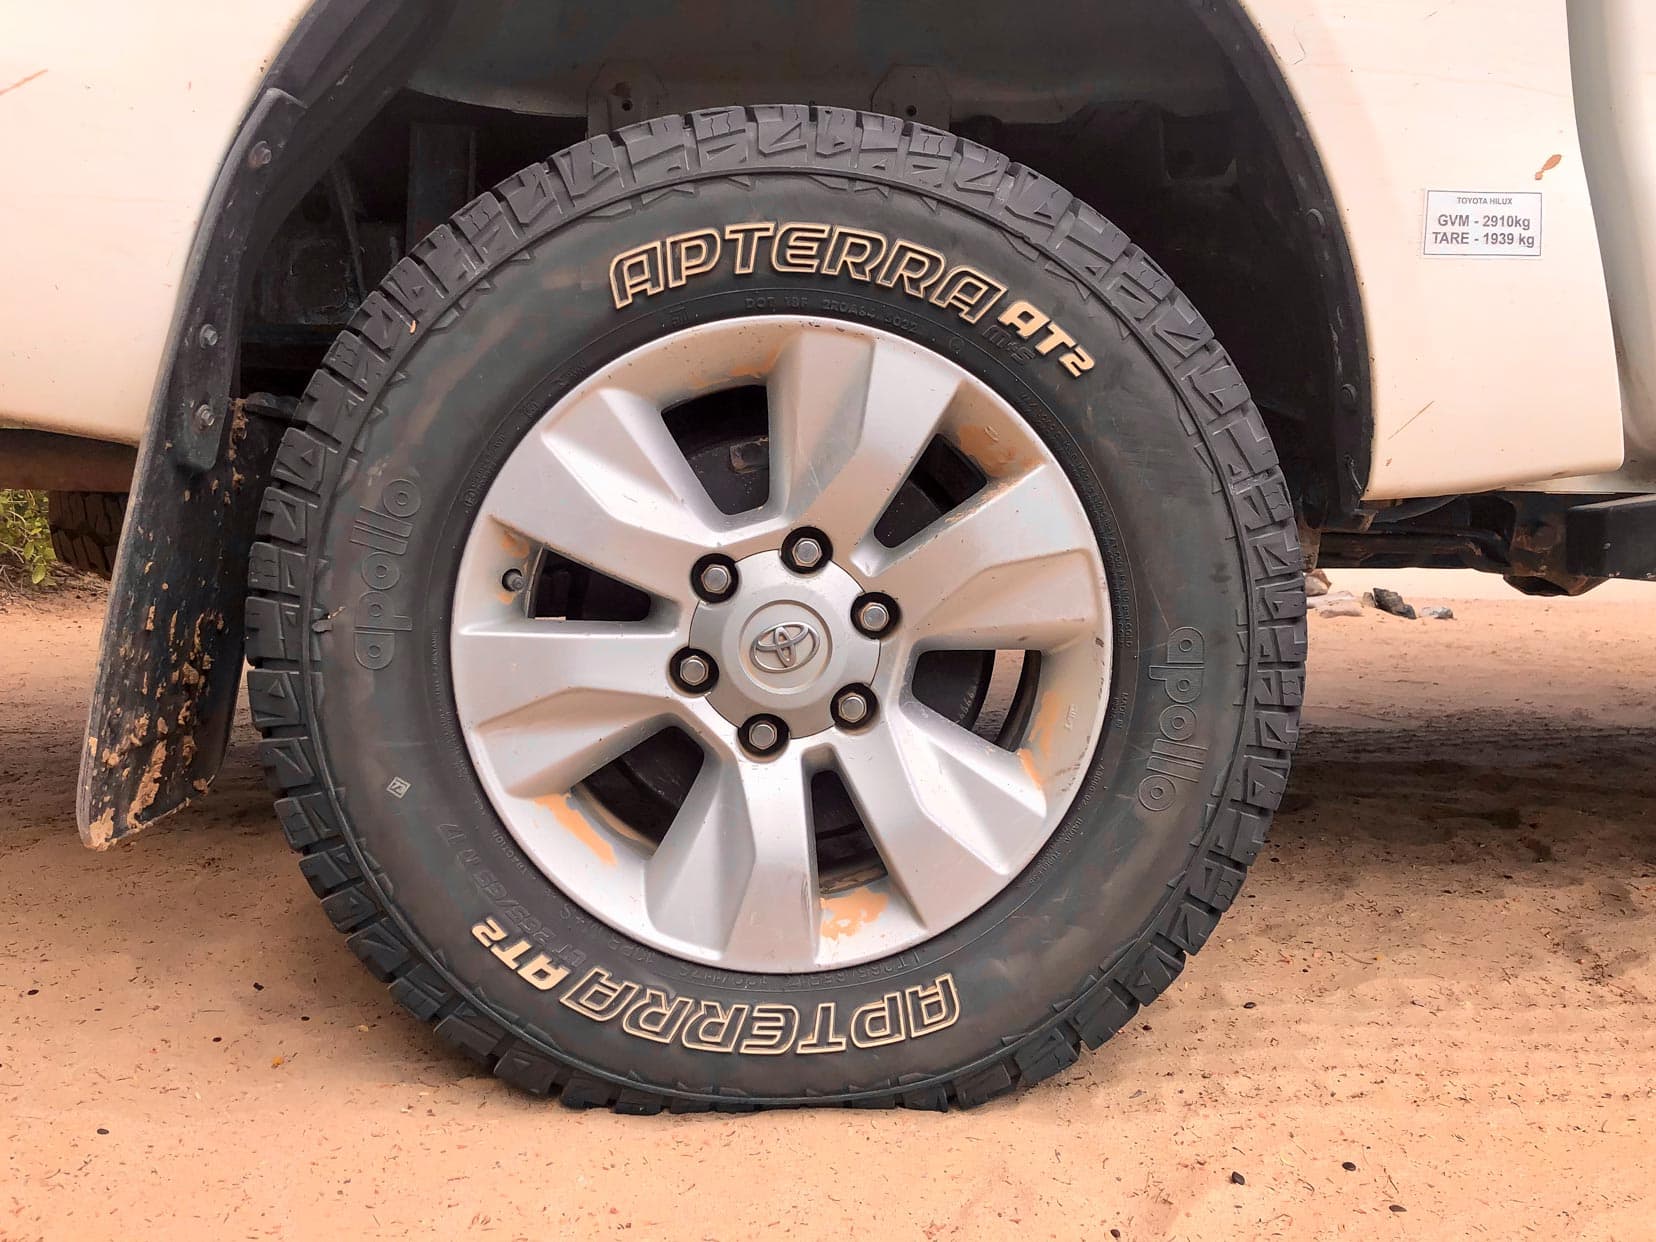 The All-terrain Apollo tyre we use on our Hilux 4x4